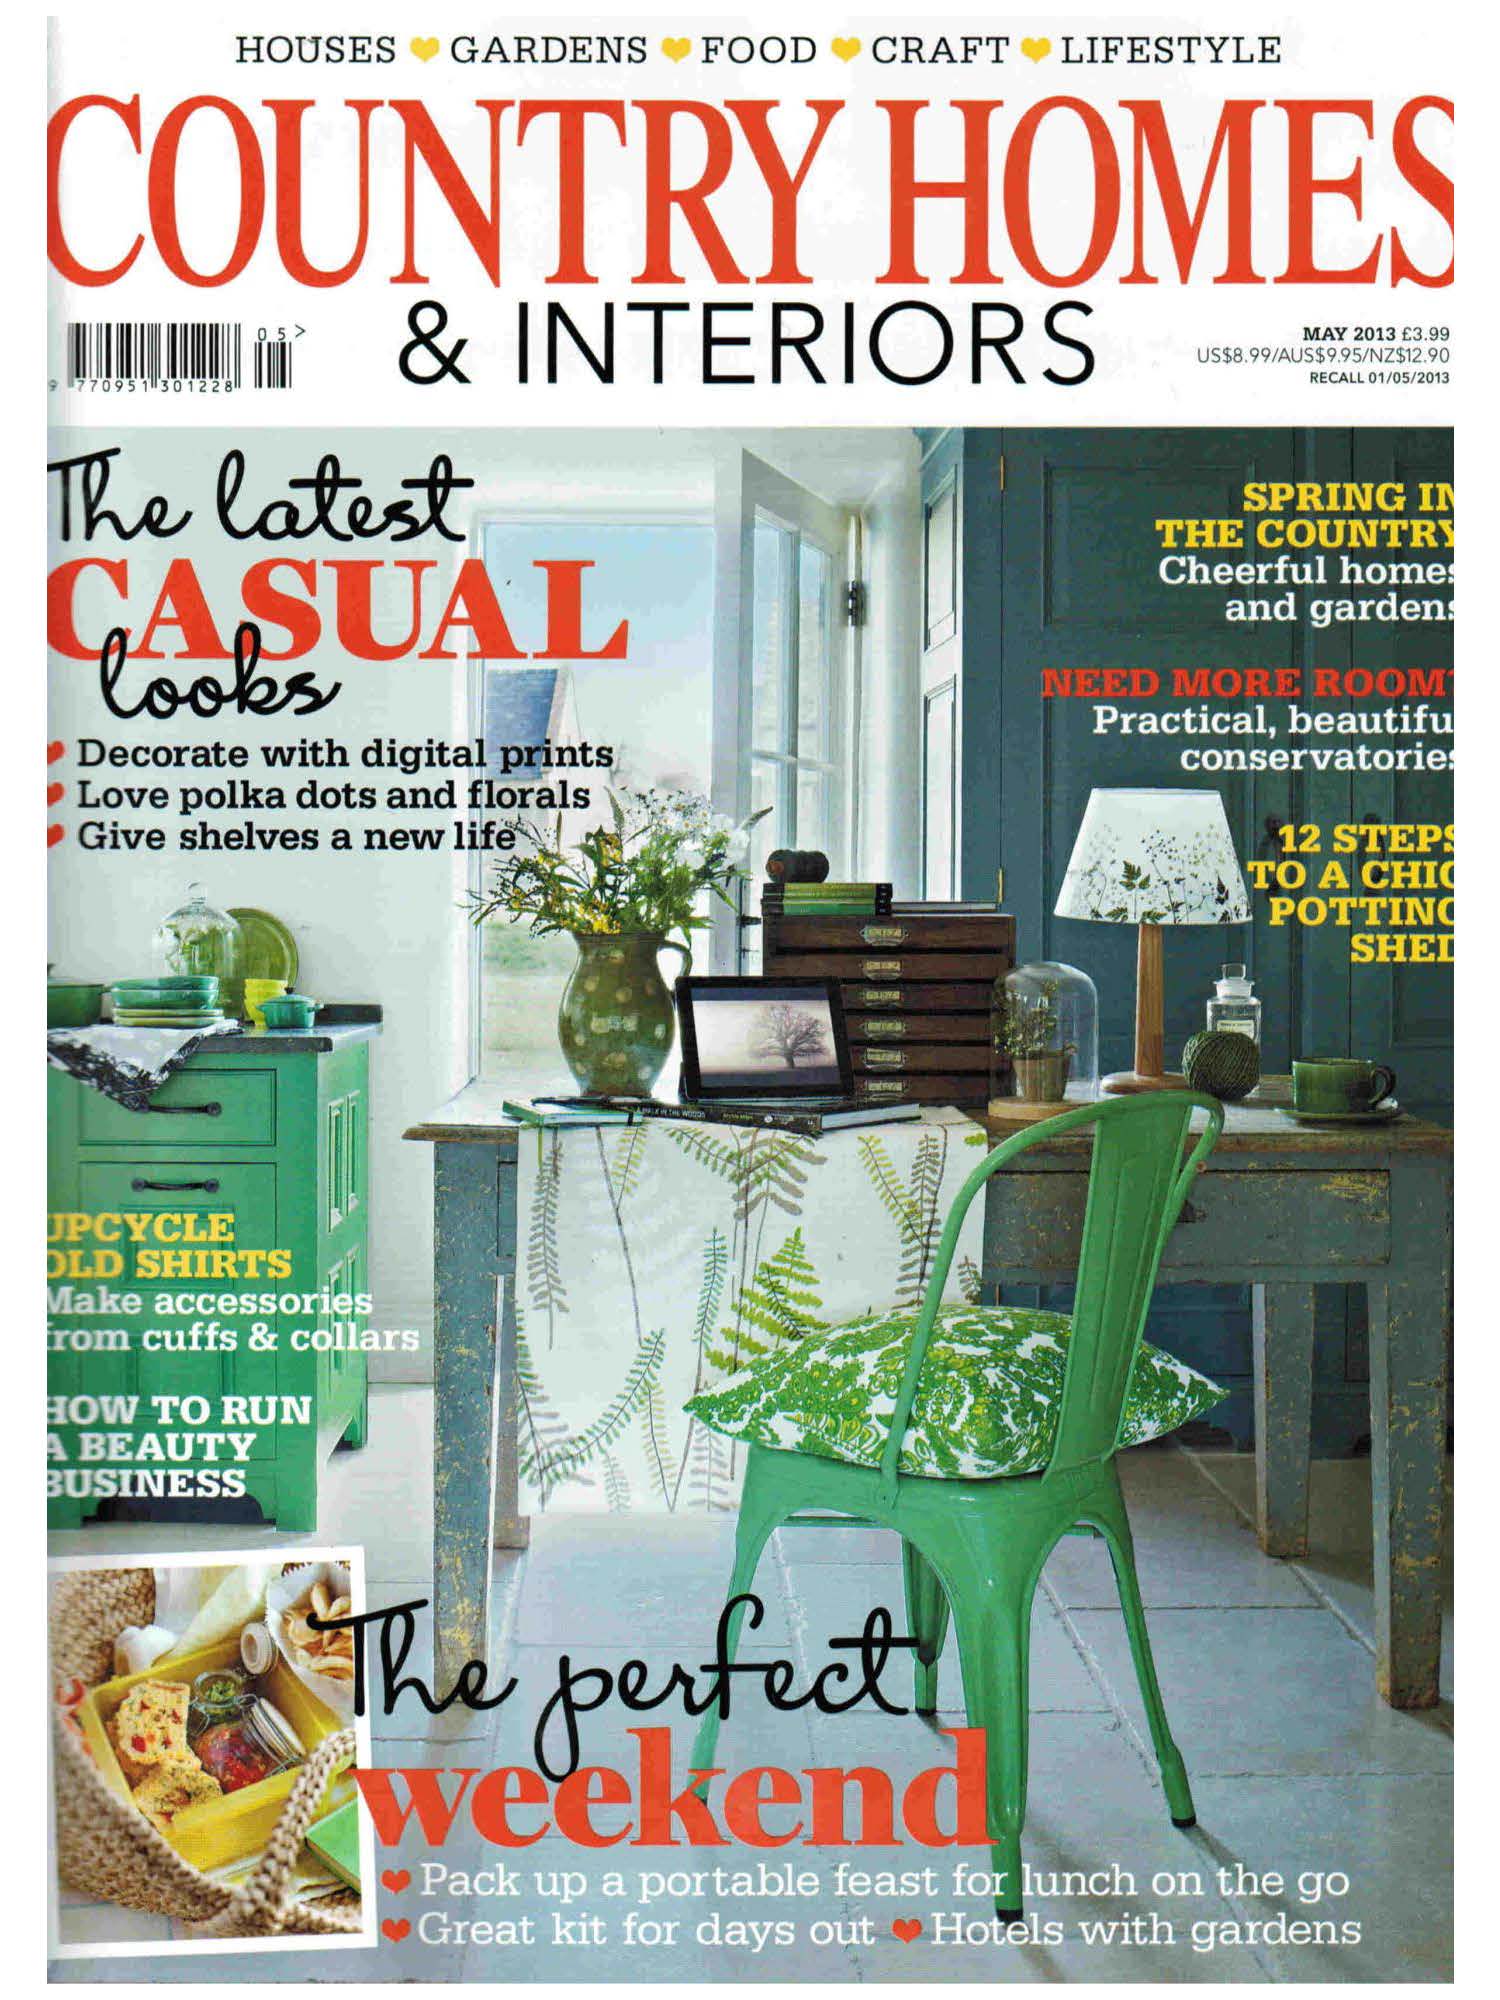 dog, dogs, style, magazine, press, editorial, country homes, interiors